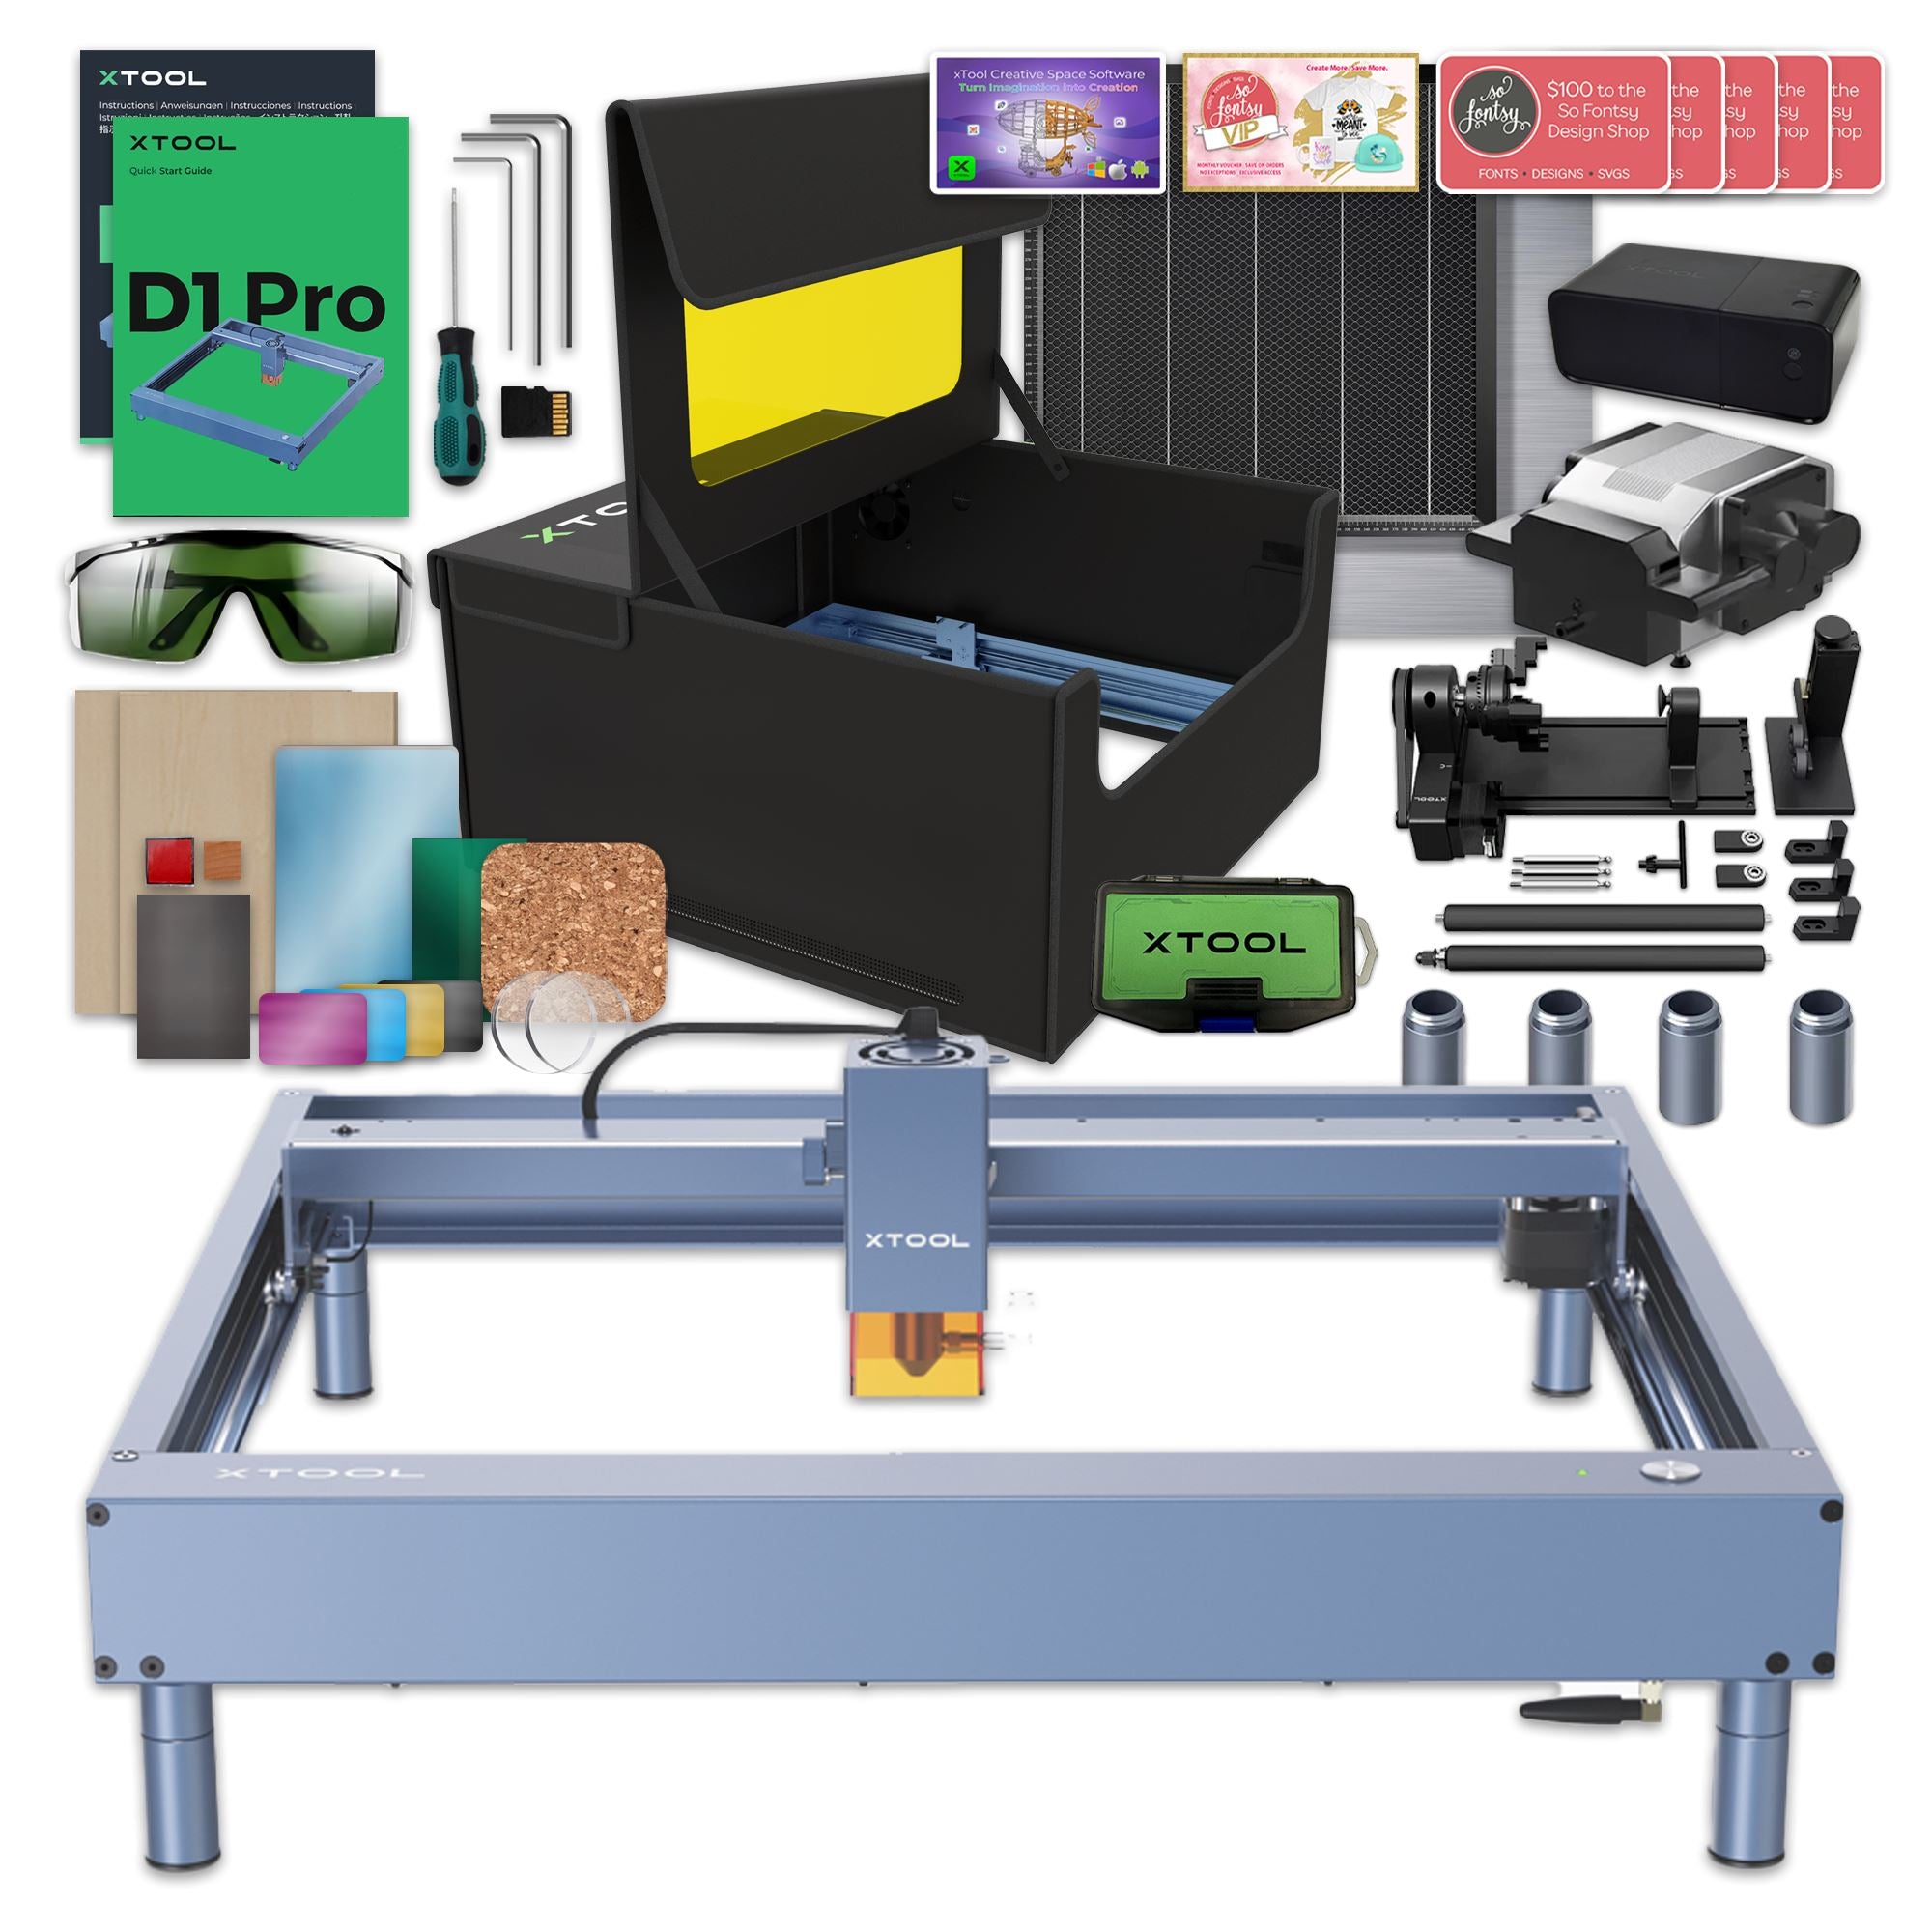 xTool F1 Portable Laser Engraver and Cutter Deluxe Bundle